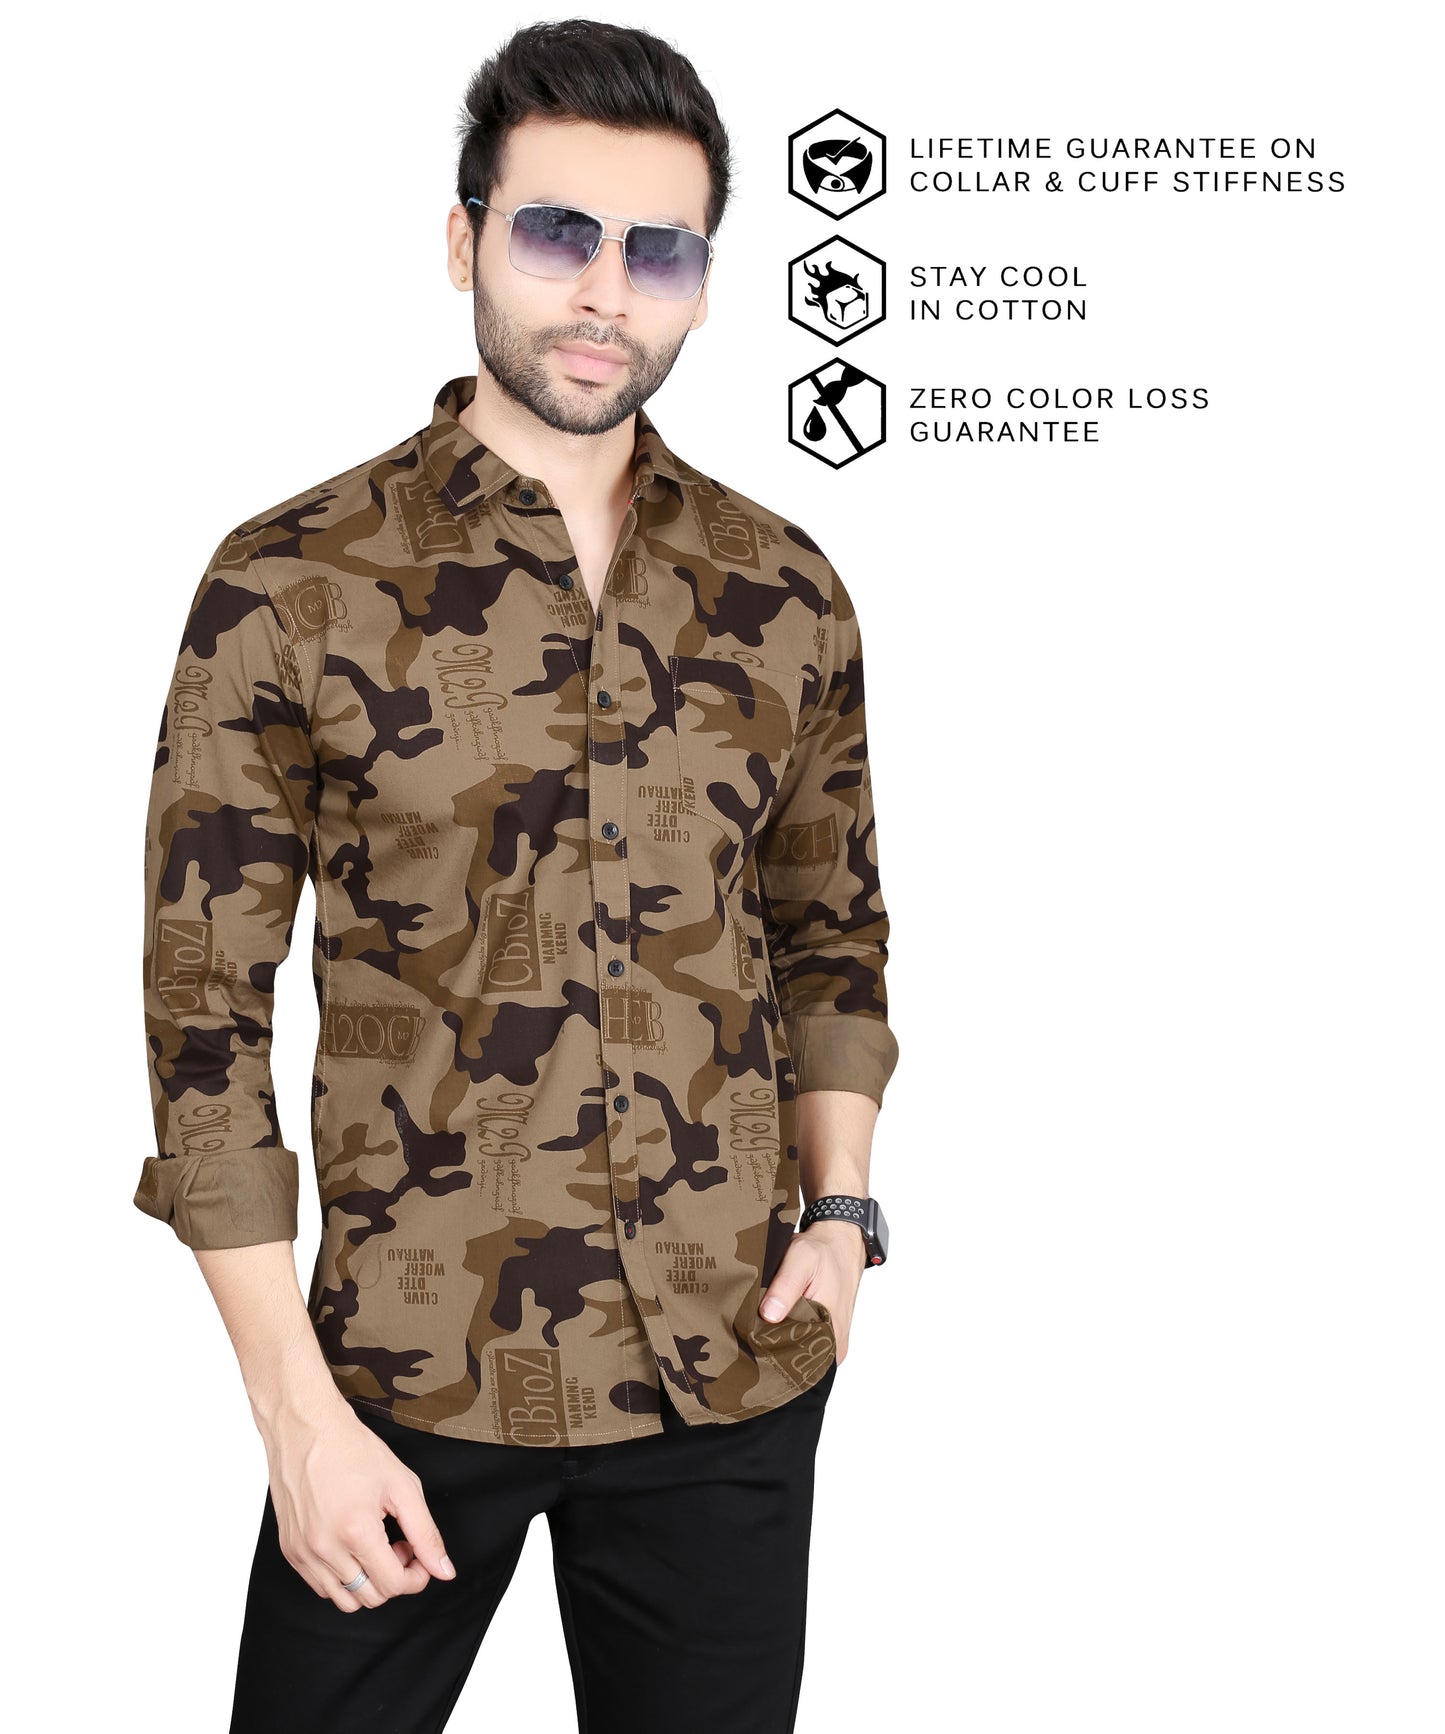 5thanfold Men's Casual Pure Cotton Full Sleeve Printed Brown Slim Fit Shirt